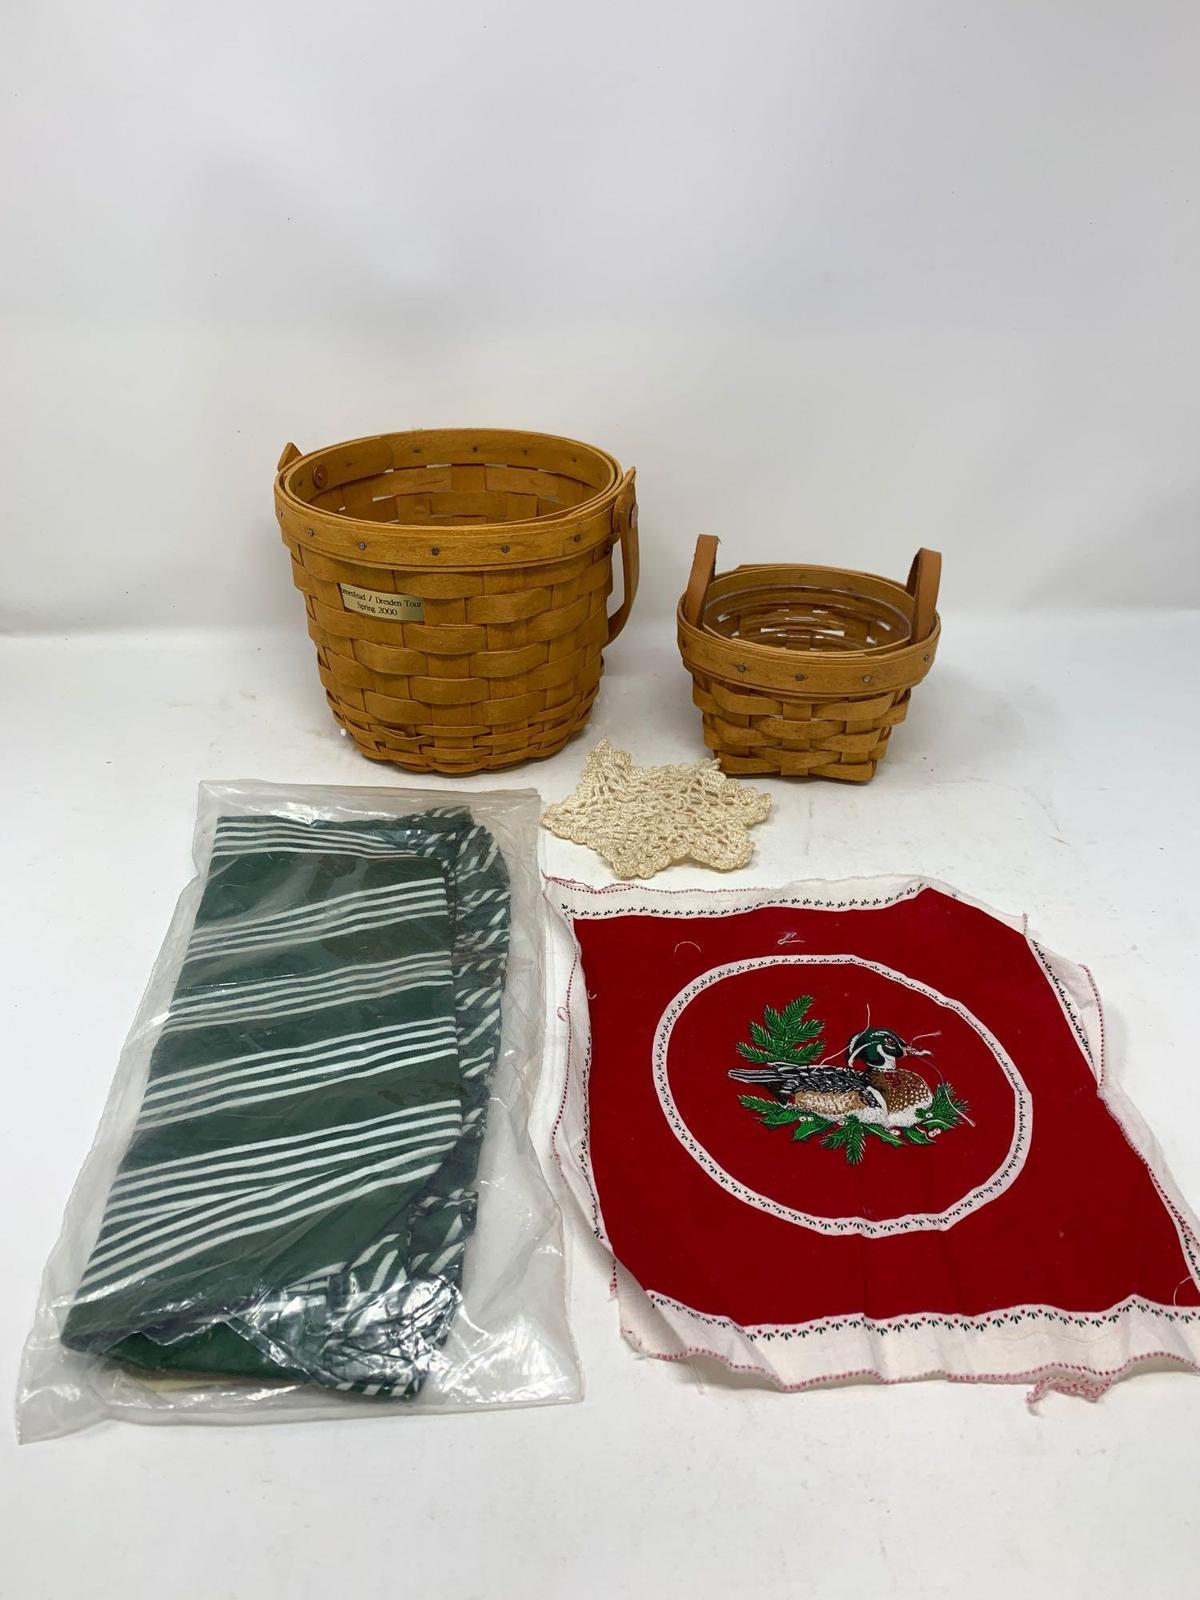 Two Longaberger Baskets, liners and covers.